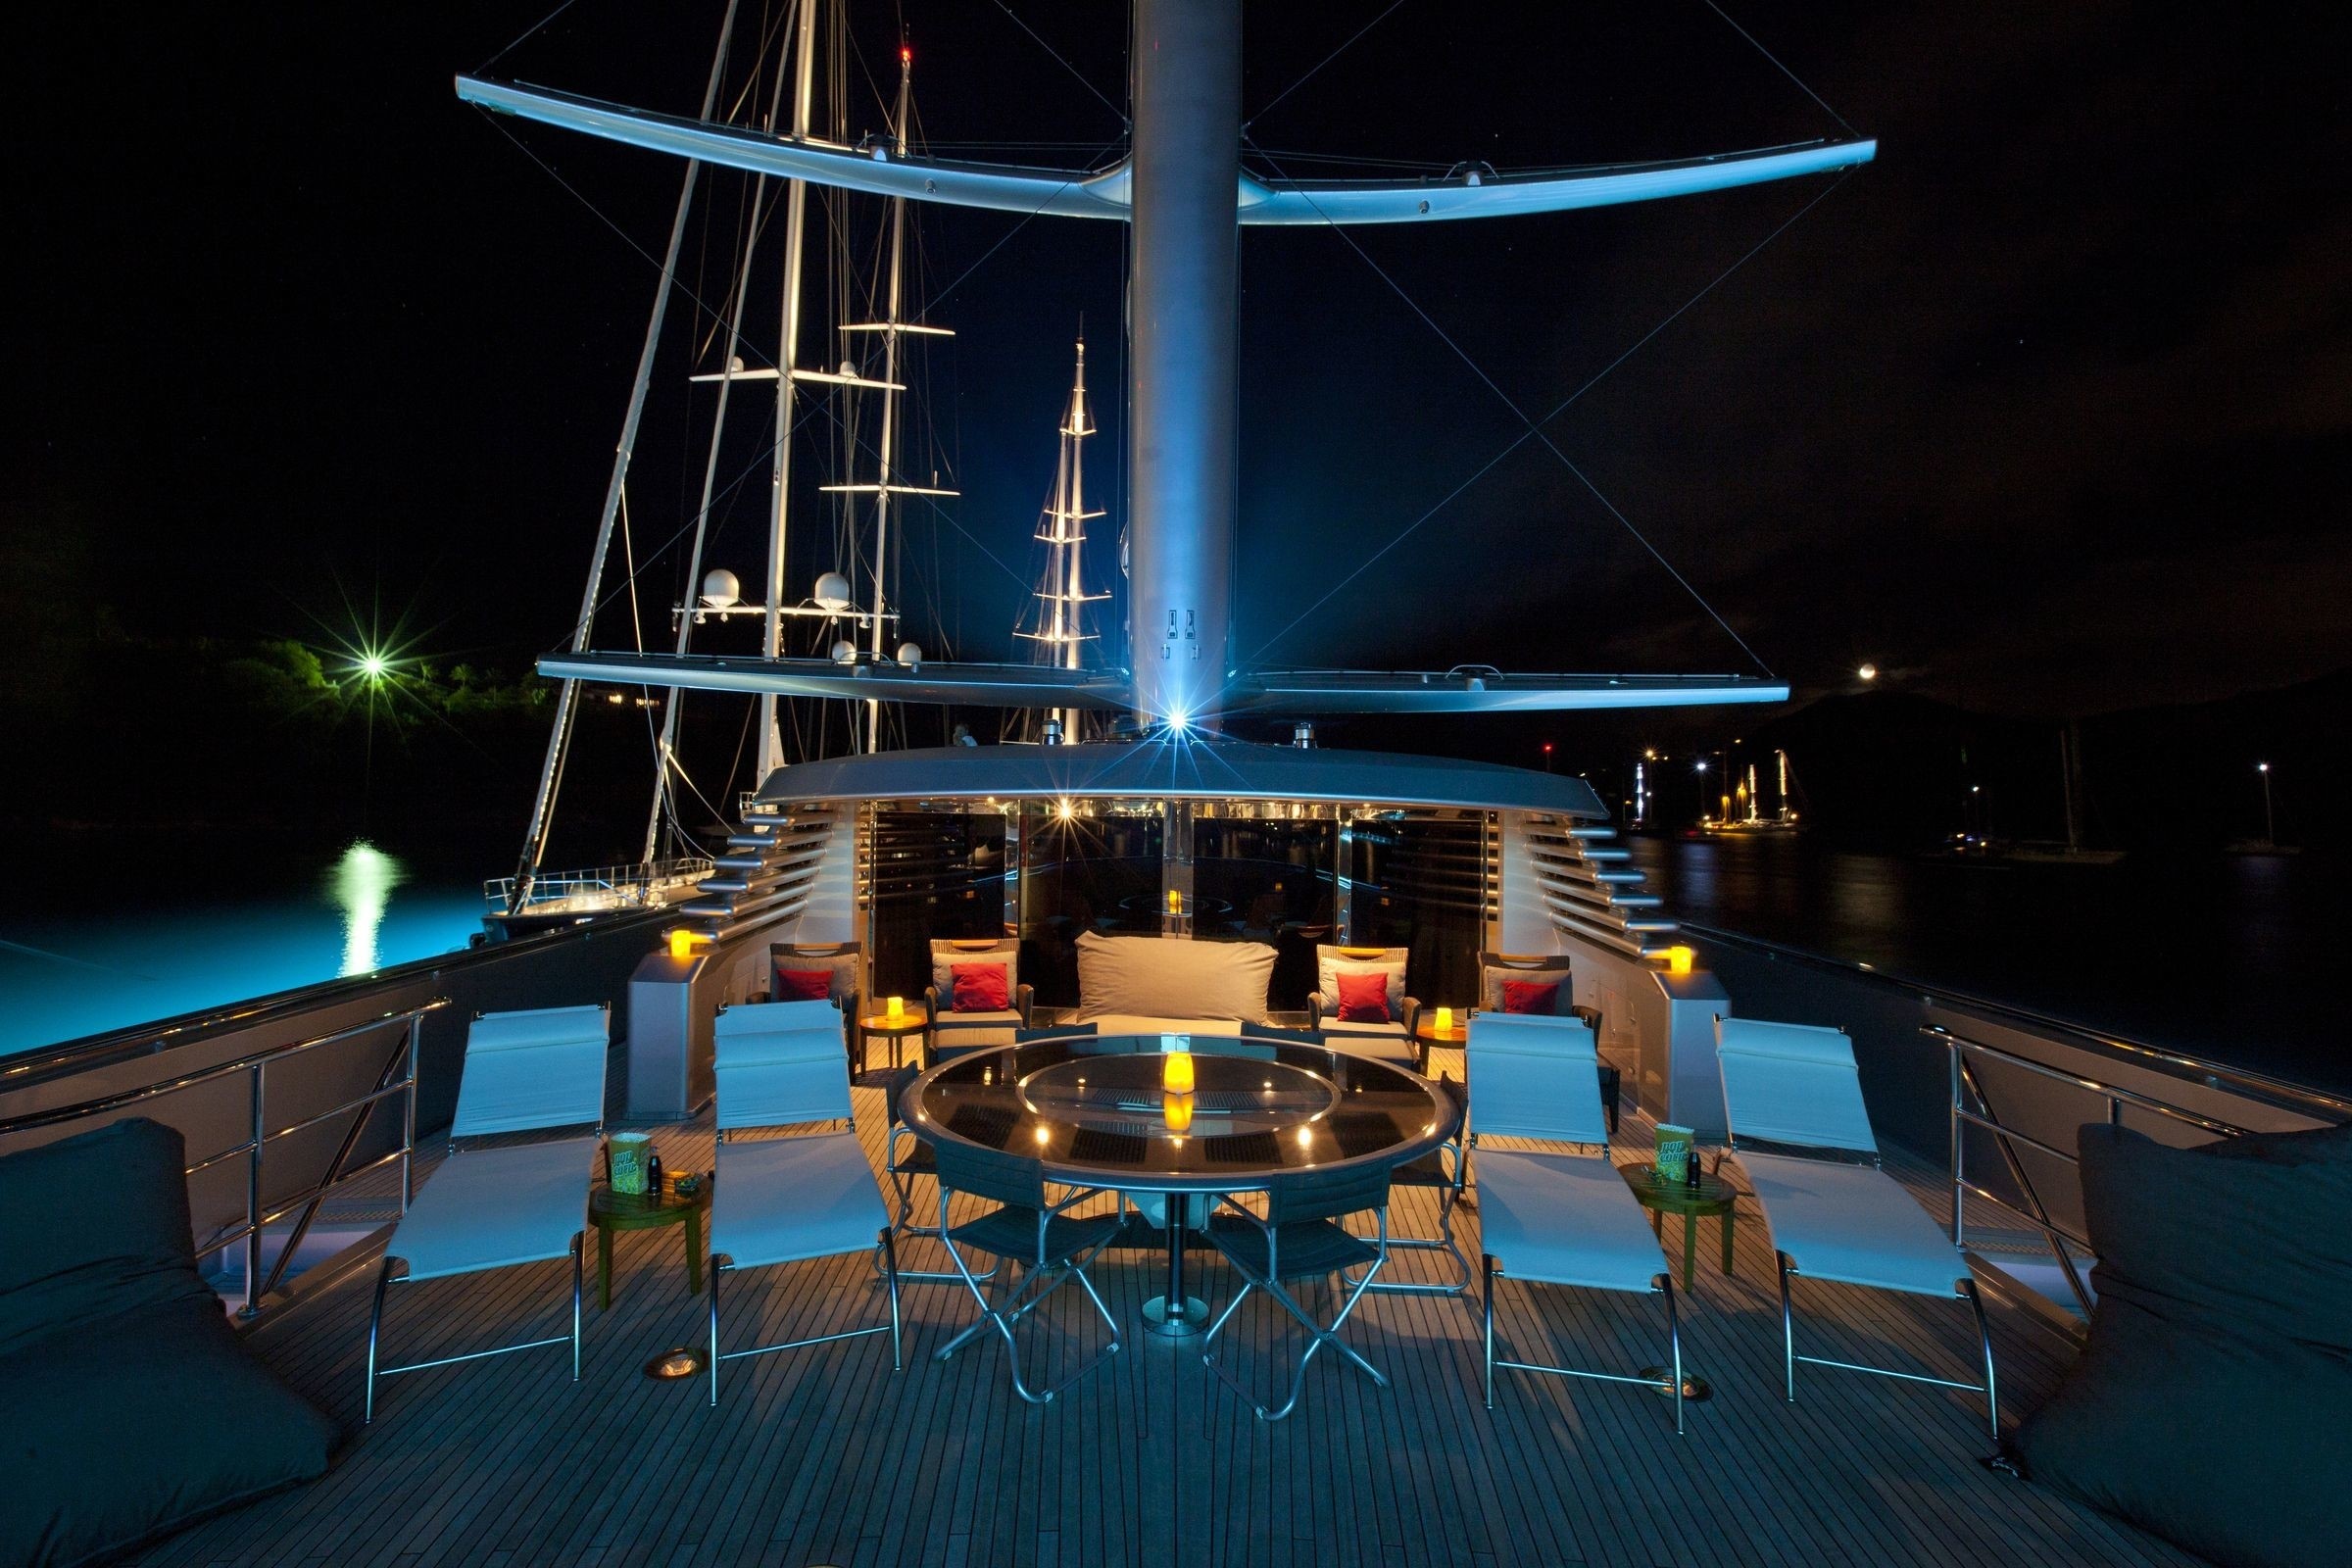 Evening: Yacht MALTESE FALCON's Deck Pictured